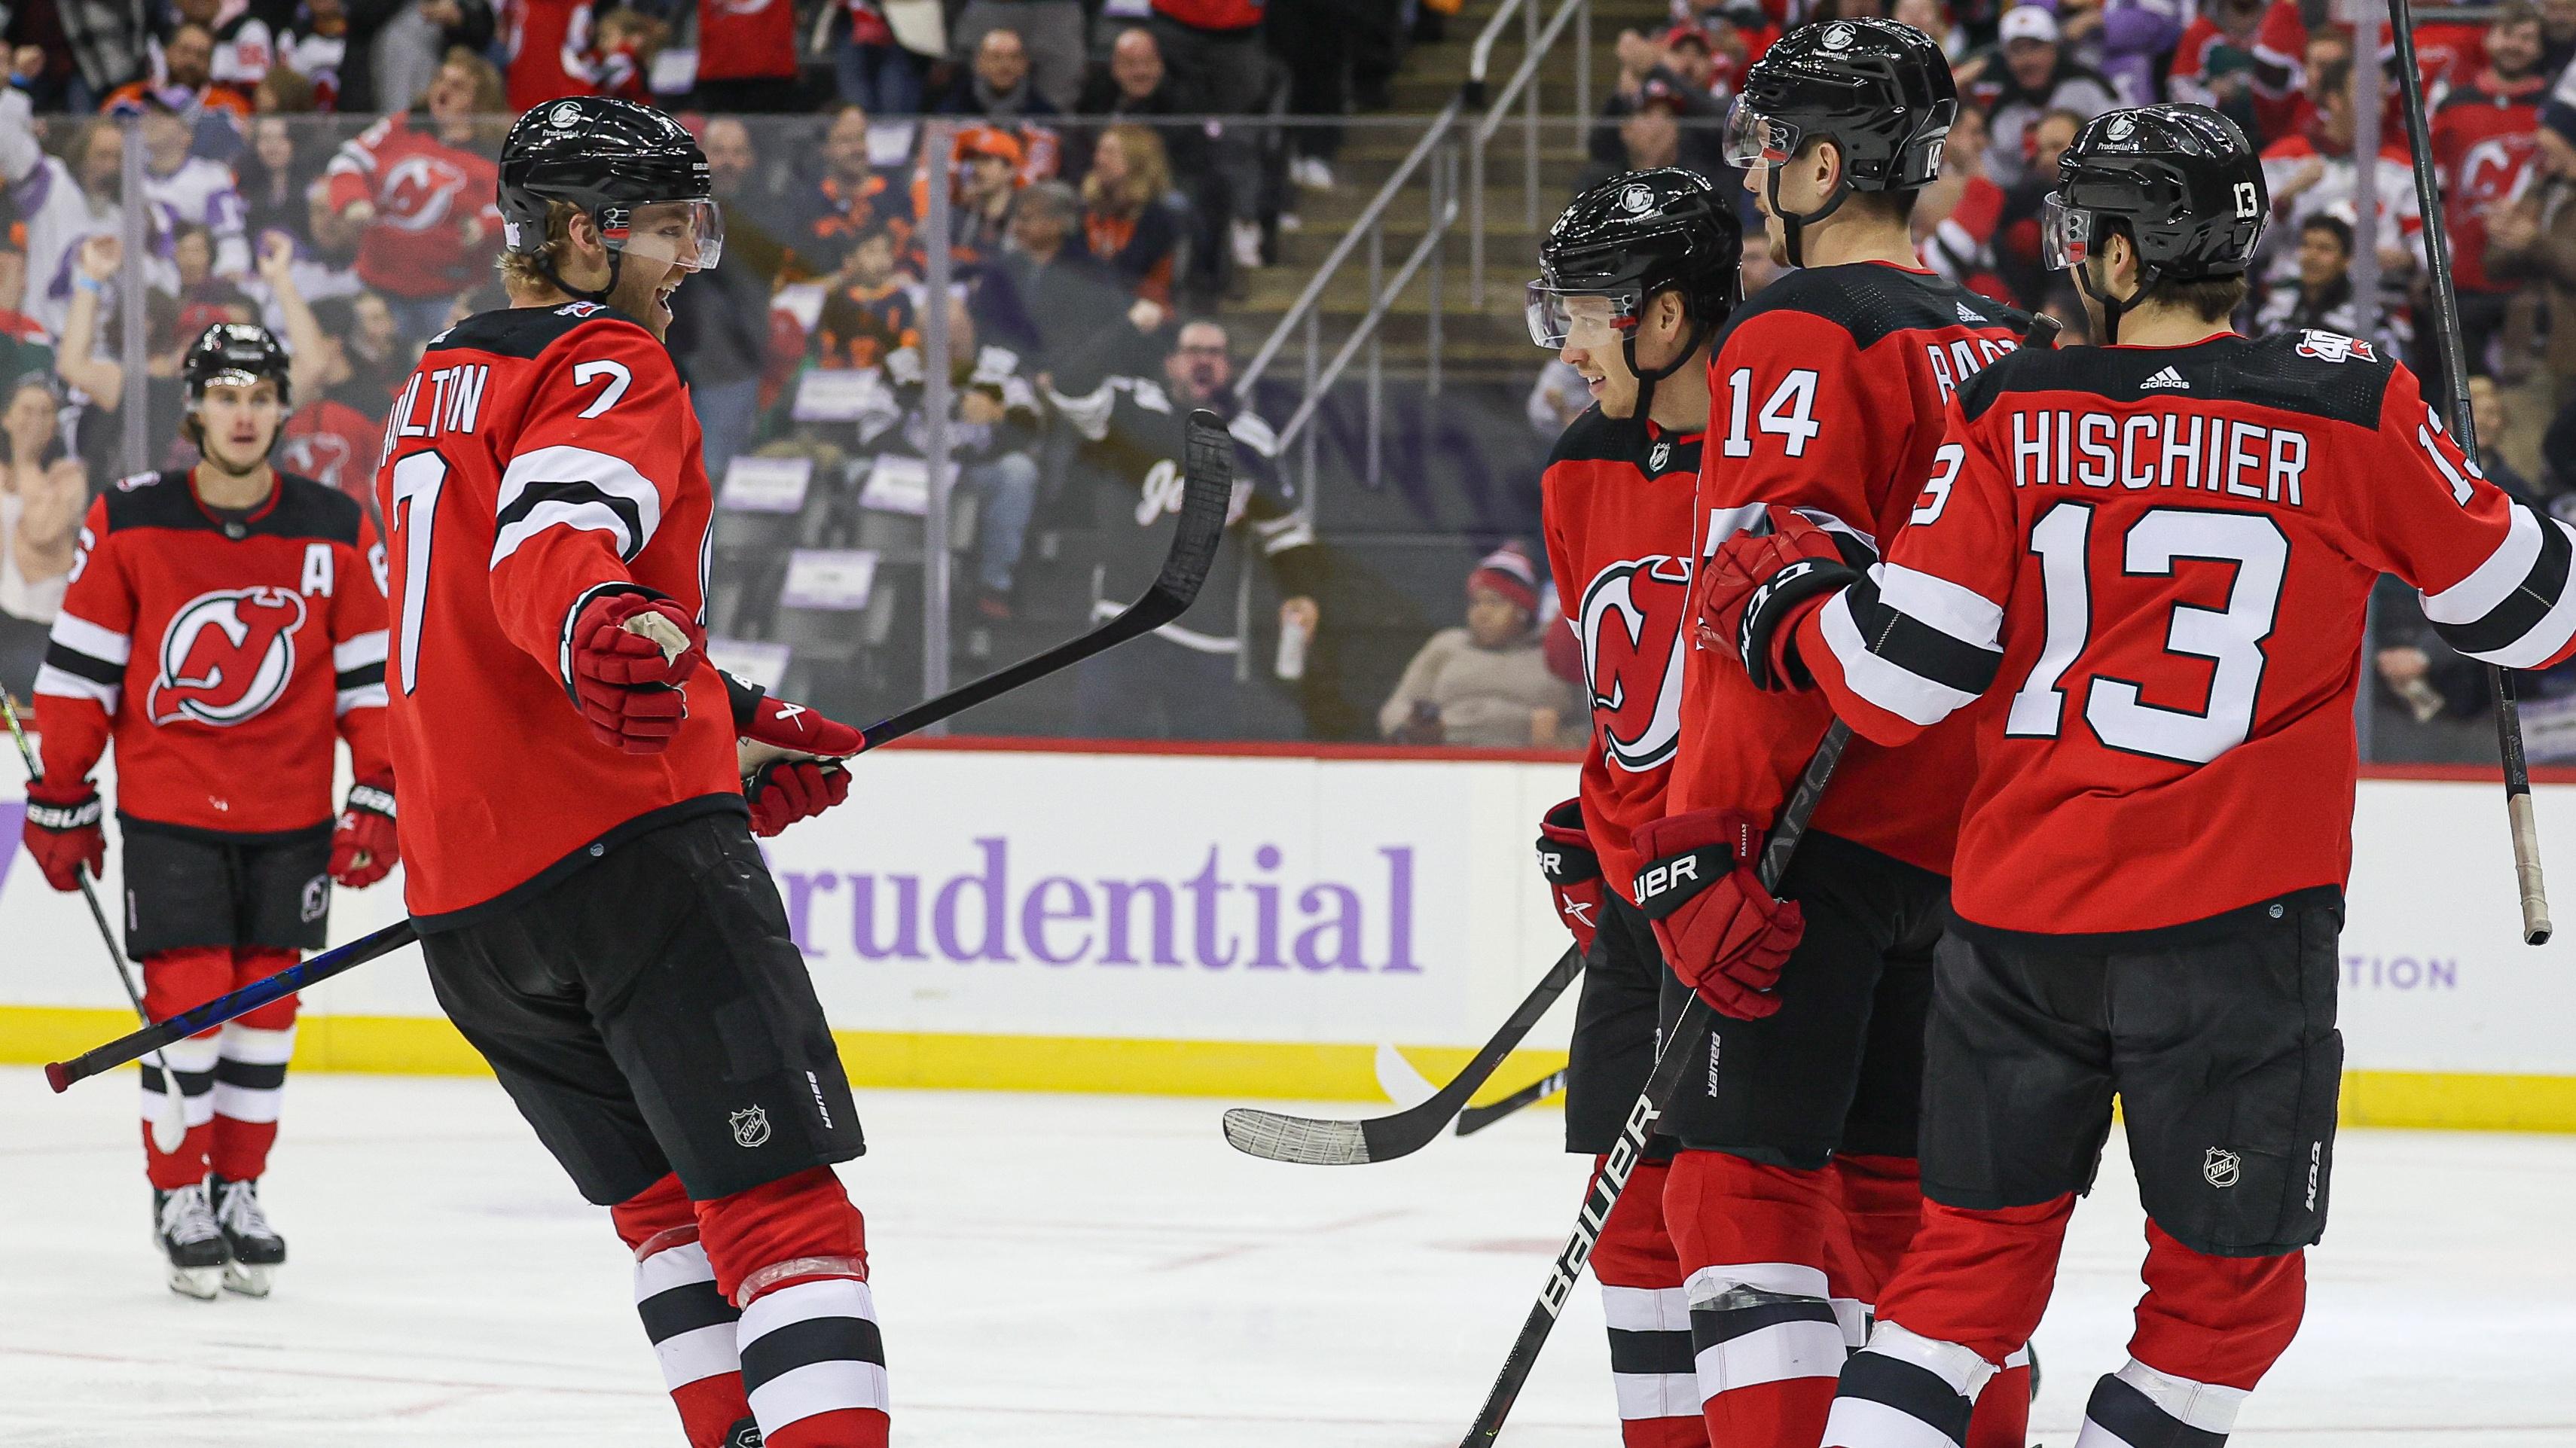 New Jersey Devils left wing Jesper Bratt (63) celebrates his goal with teammates during the first period